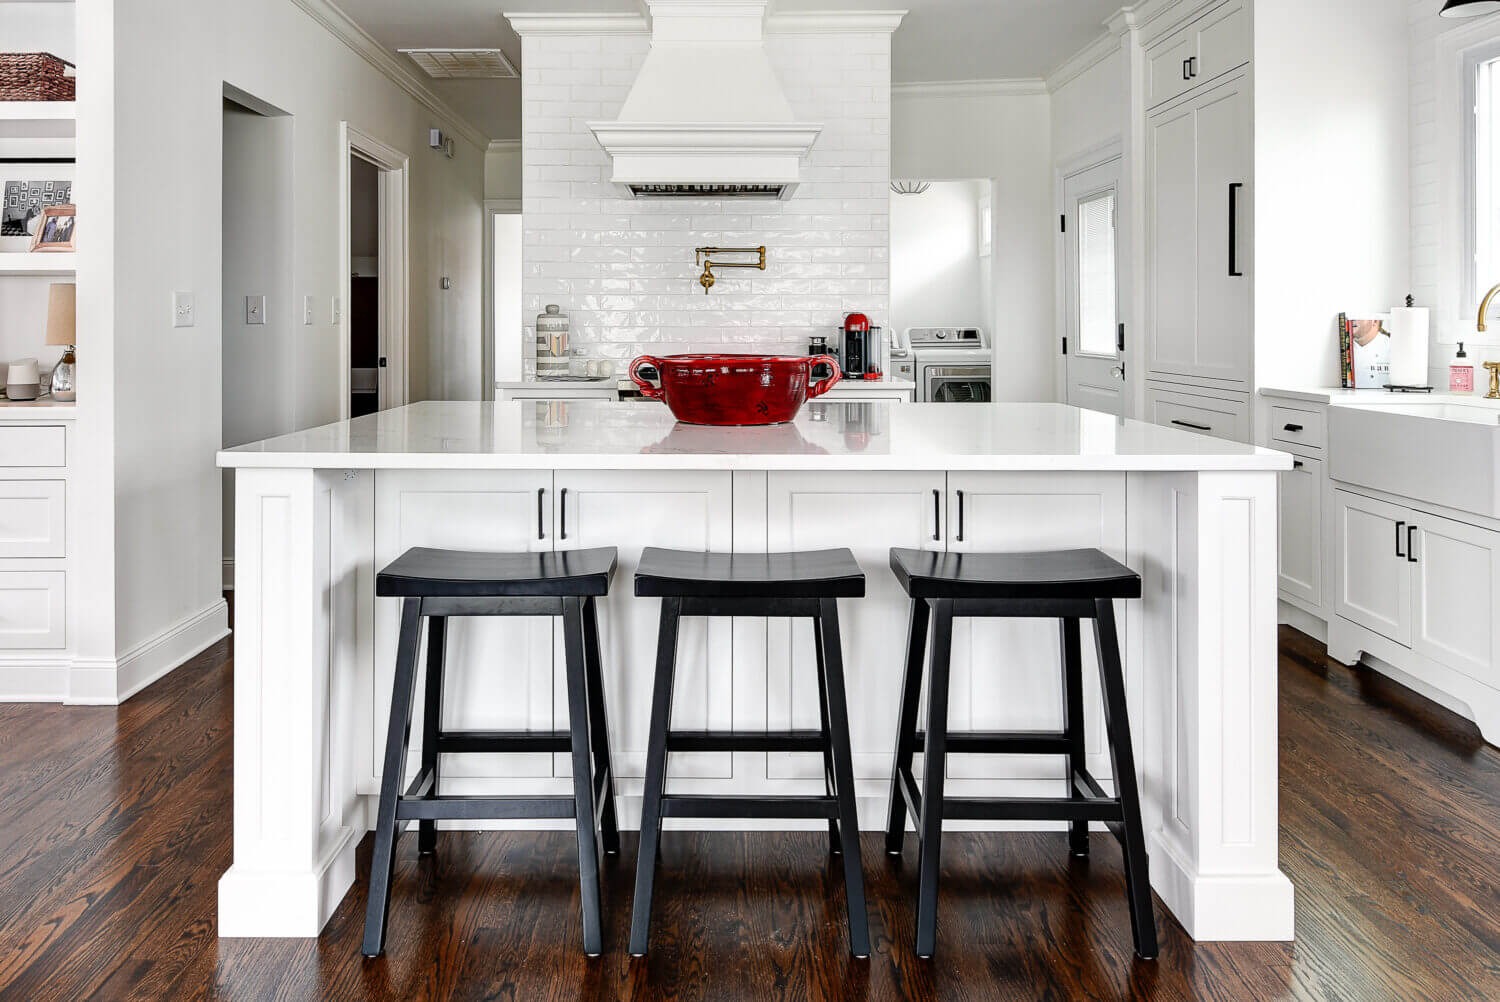 The kitchen island and wood hood create a beautiful center to this kitchen design. The 3 black stools contrast the bright white shaker style cabinets.